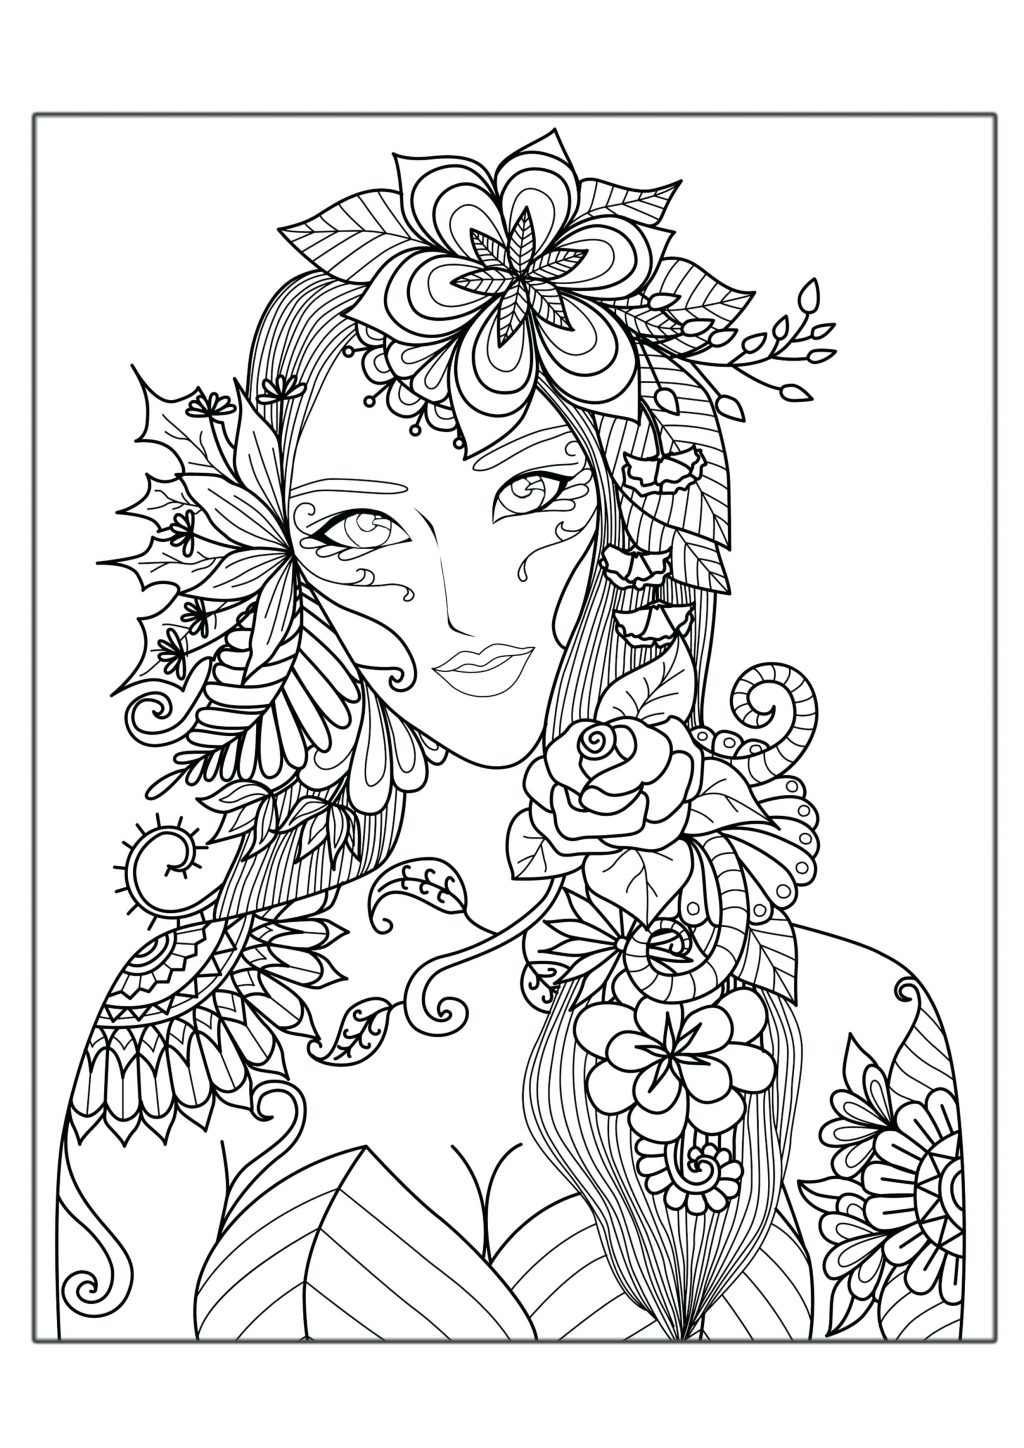 Free Printable Animal Coloring Pages For Adults Only - Giving this